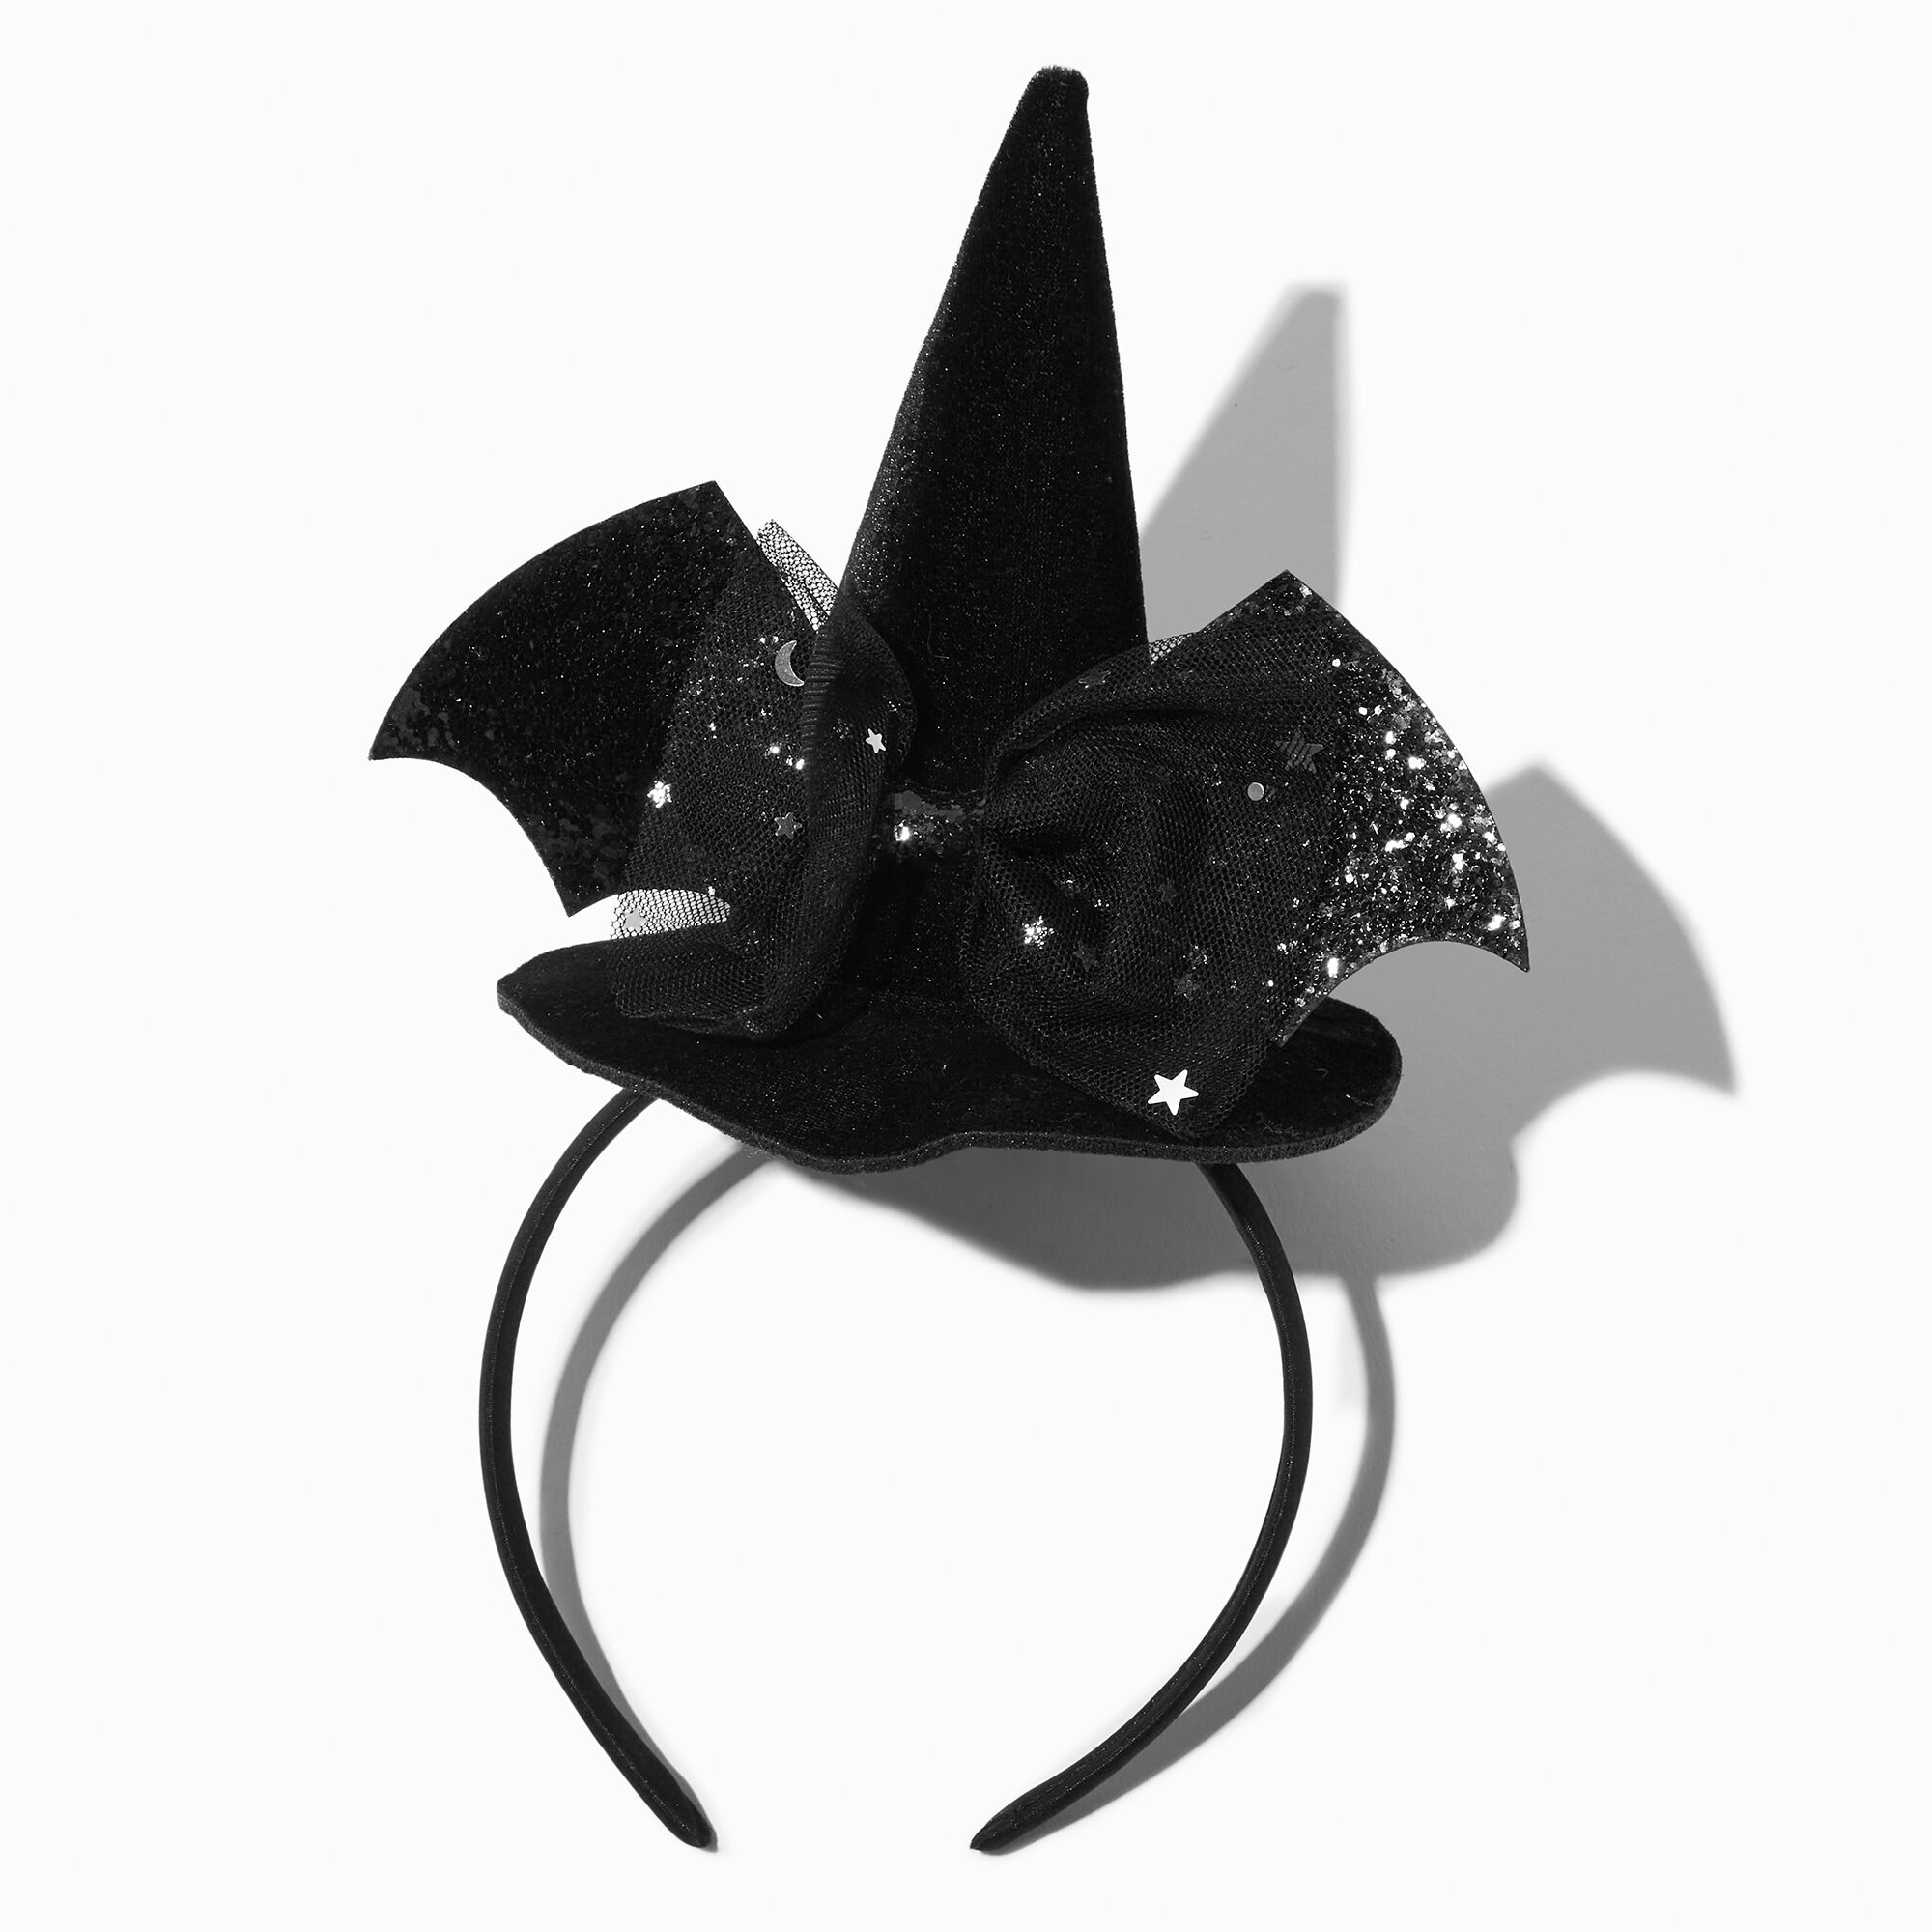 View Claires Bat Wings Witch Hat Headband Black information